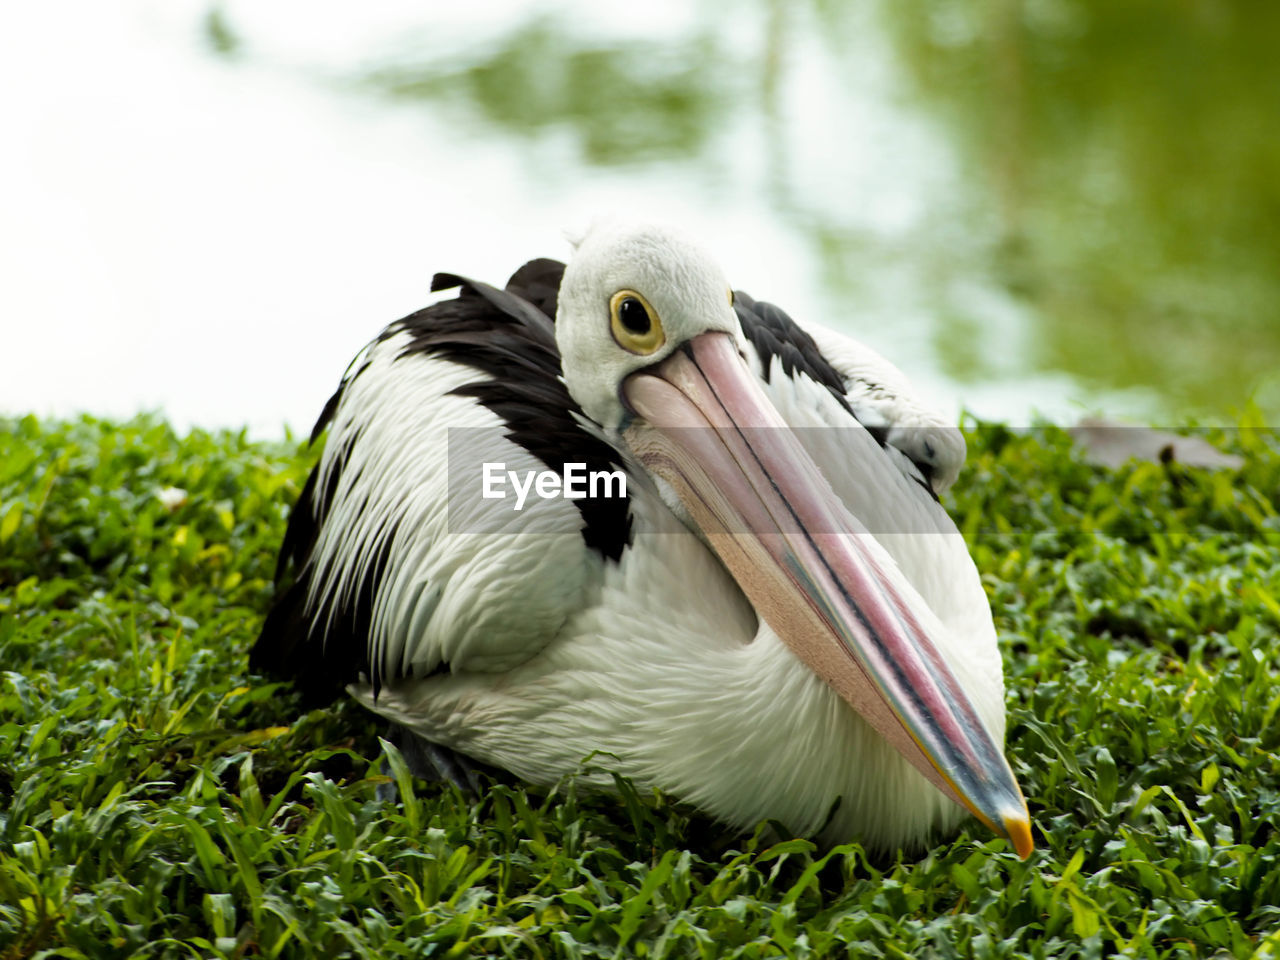 Picture of pelicans, a genus of large water birds that make up the family pelecanidae.